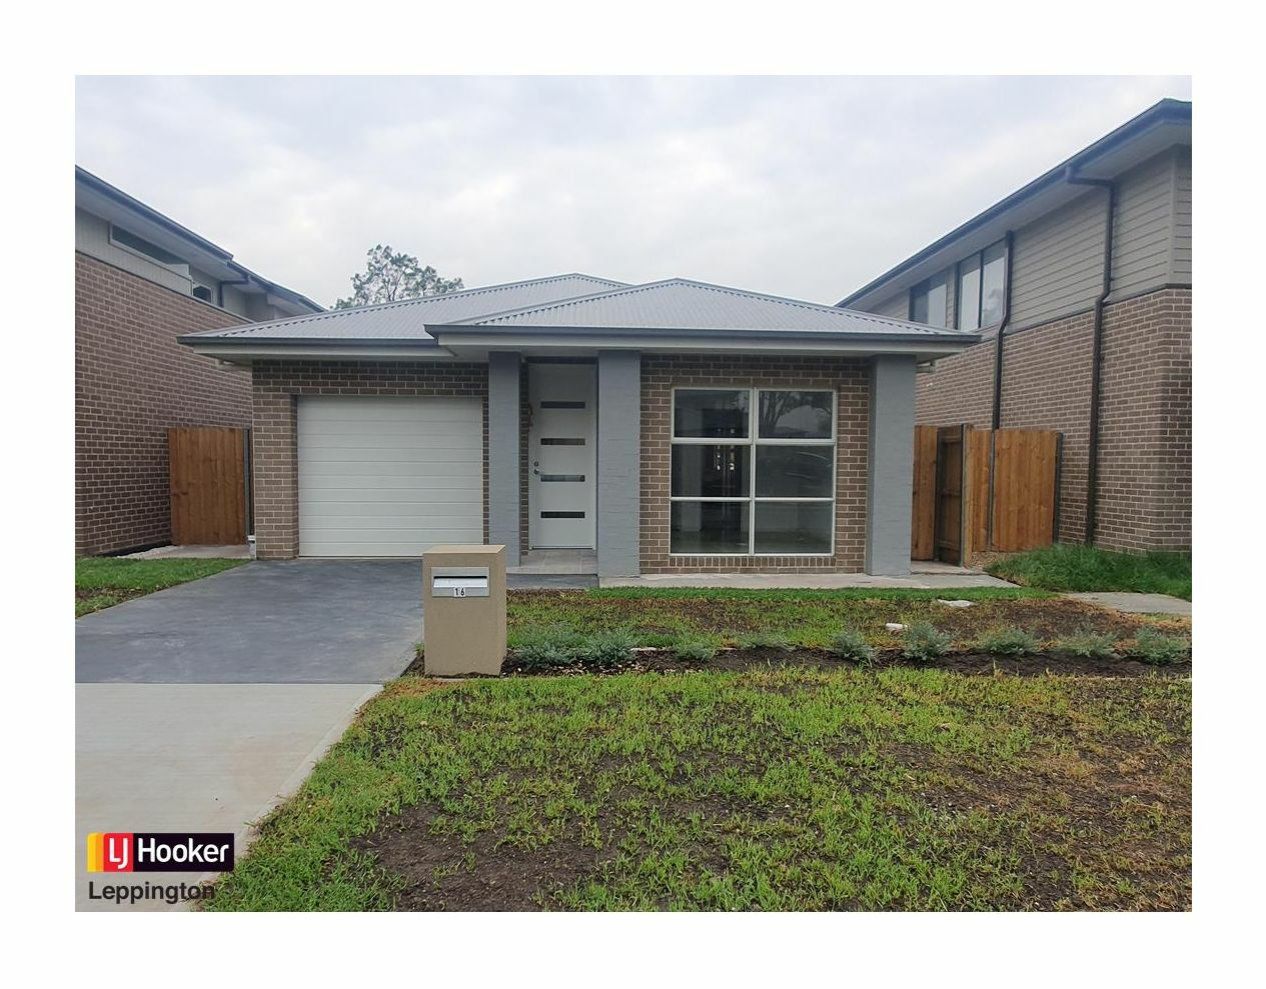 4 bedrooms House in 16 Contour Road AUSTRAL NSW, 2179